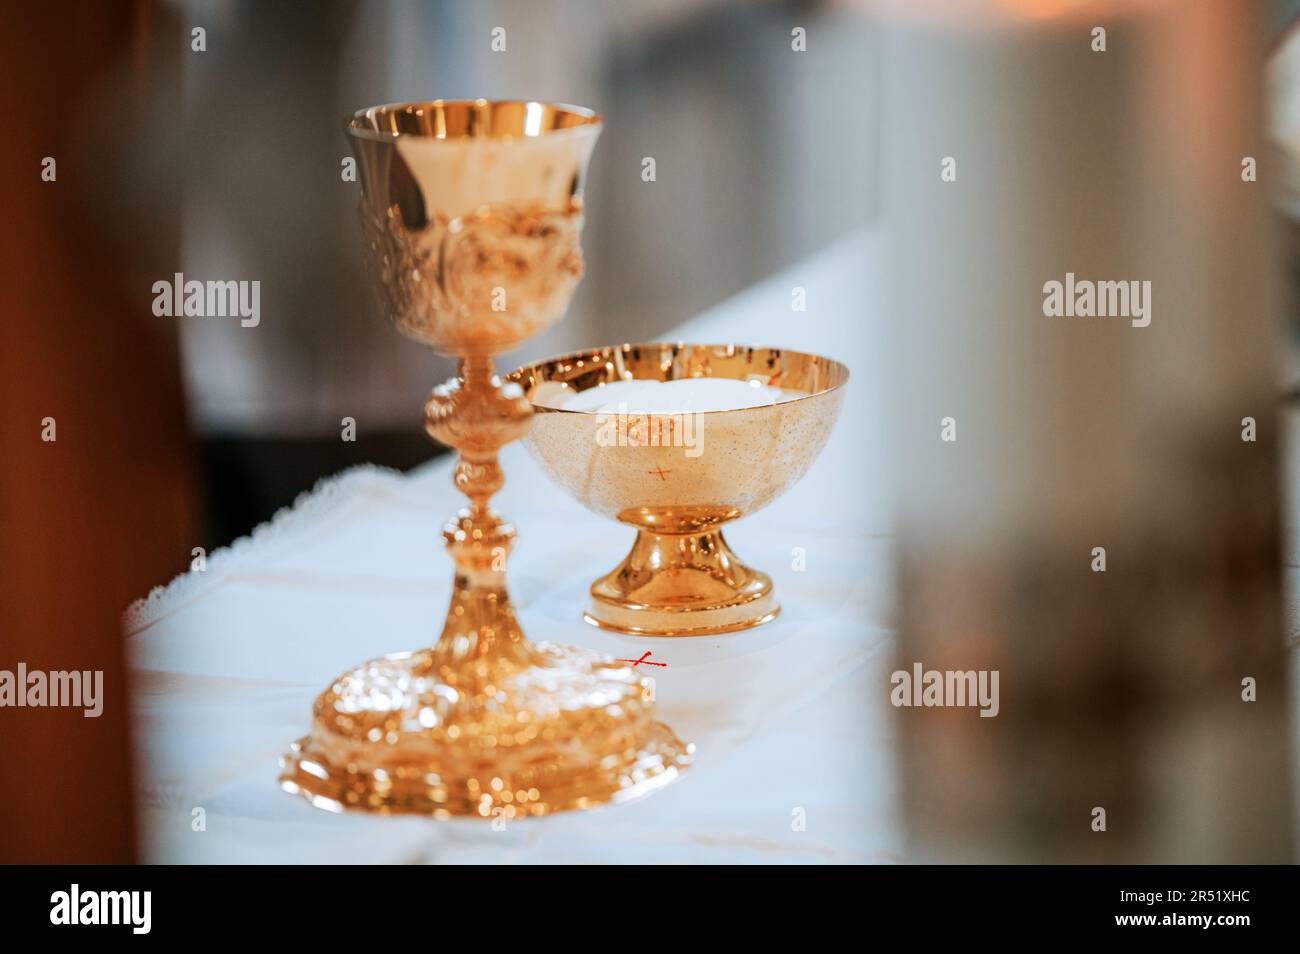 Capturing the Sacred Symbolism: A Image of the Chalice and Eucharistic Vessel During a Momentous Holy Mass in a Timeless Church Setting Stock Photo